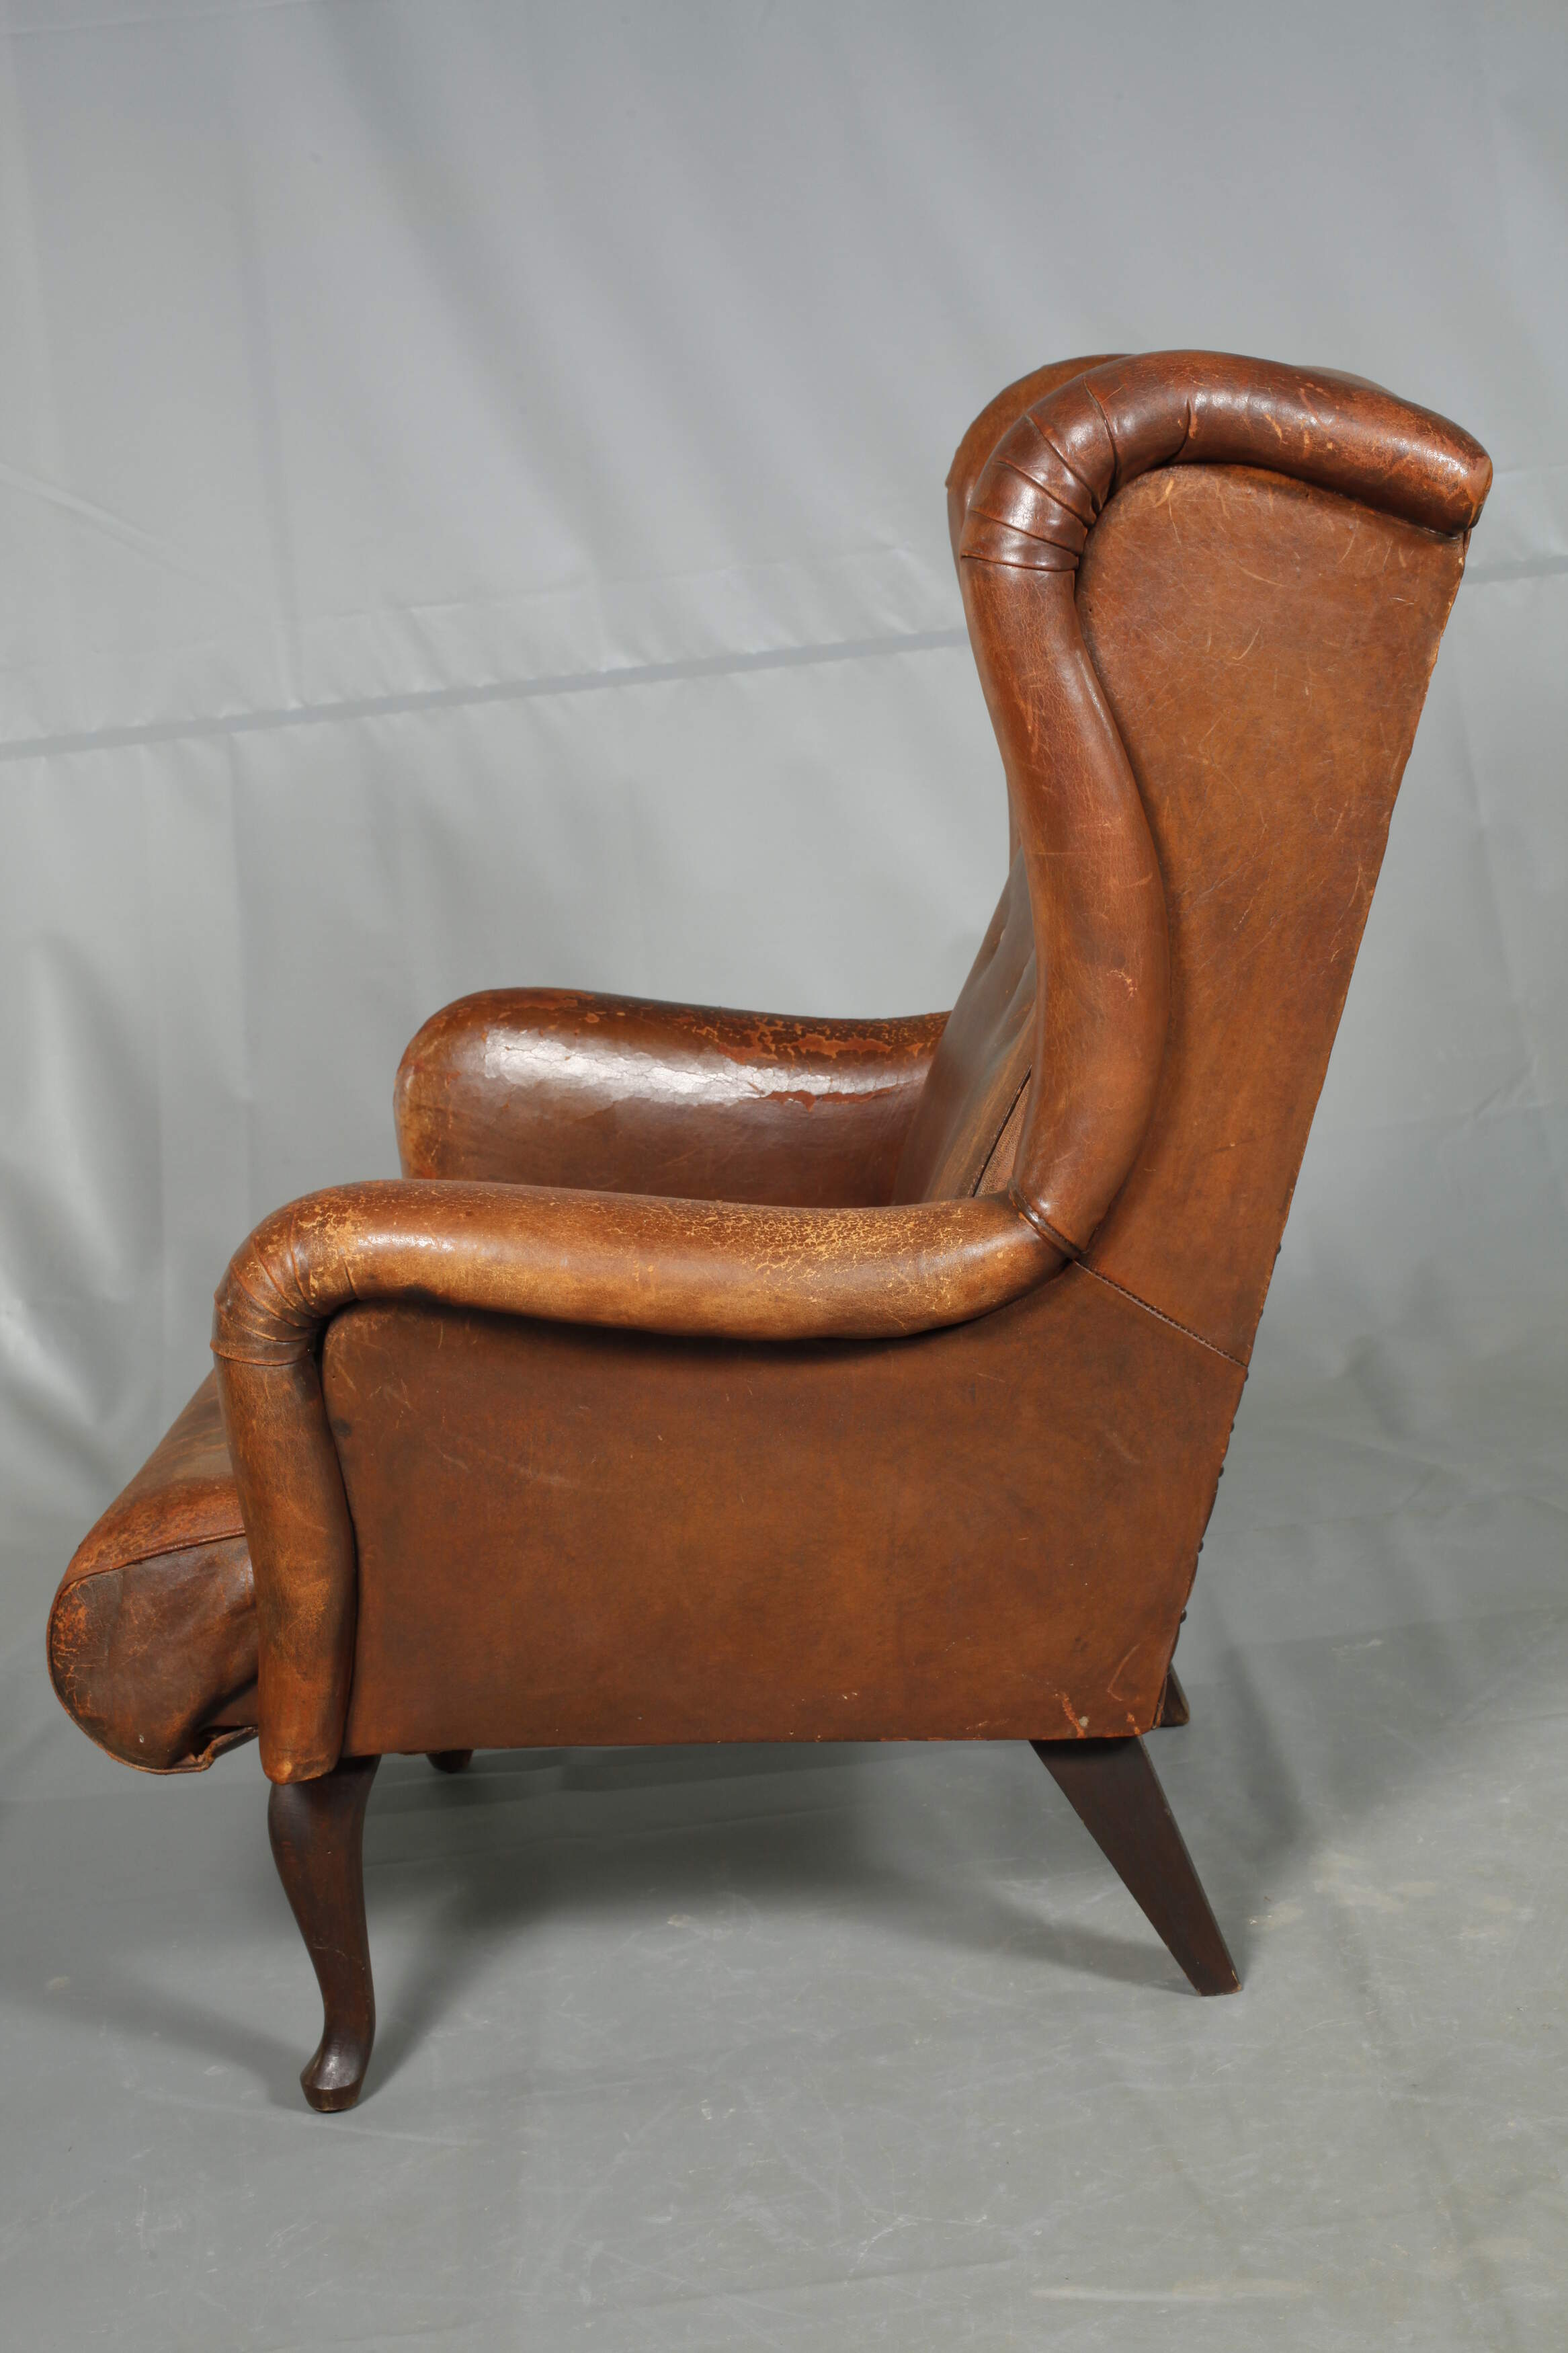 Pair of leather armchairs - Image 4 of 5